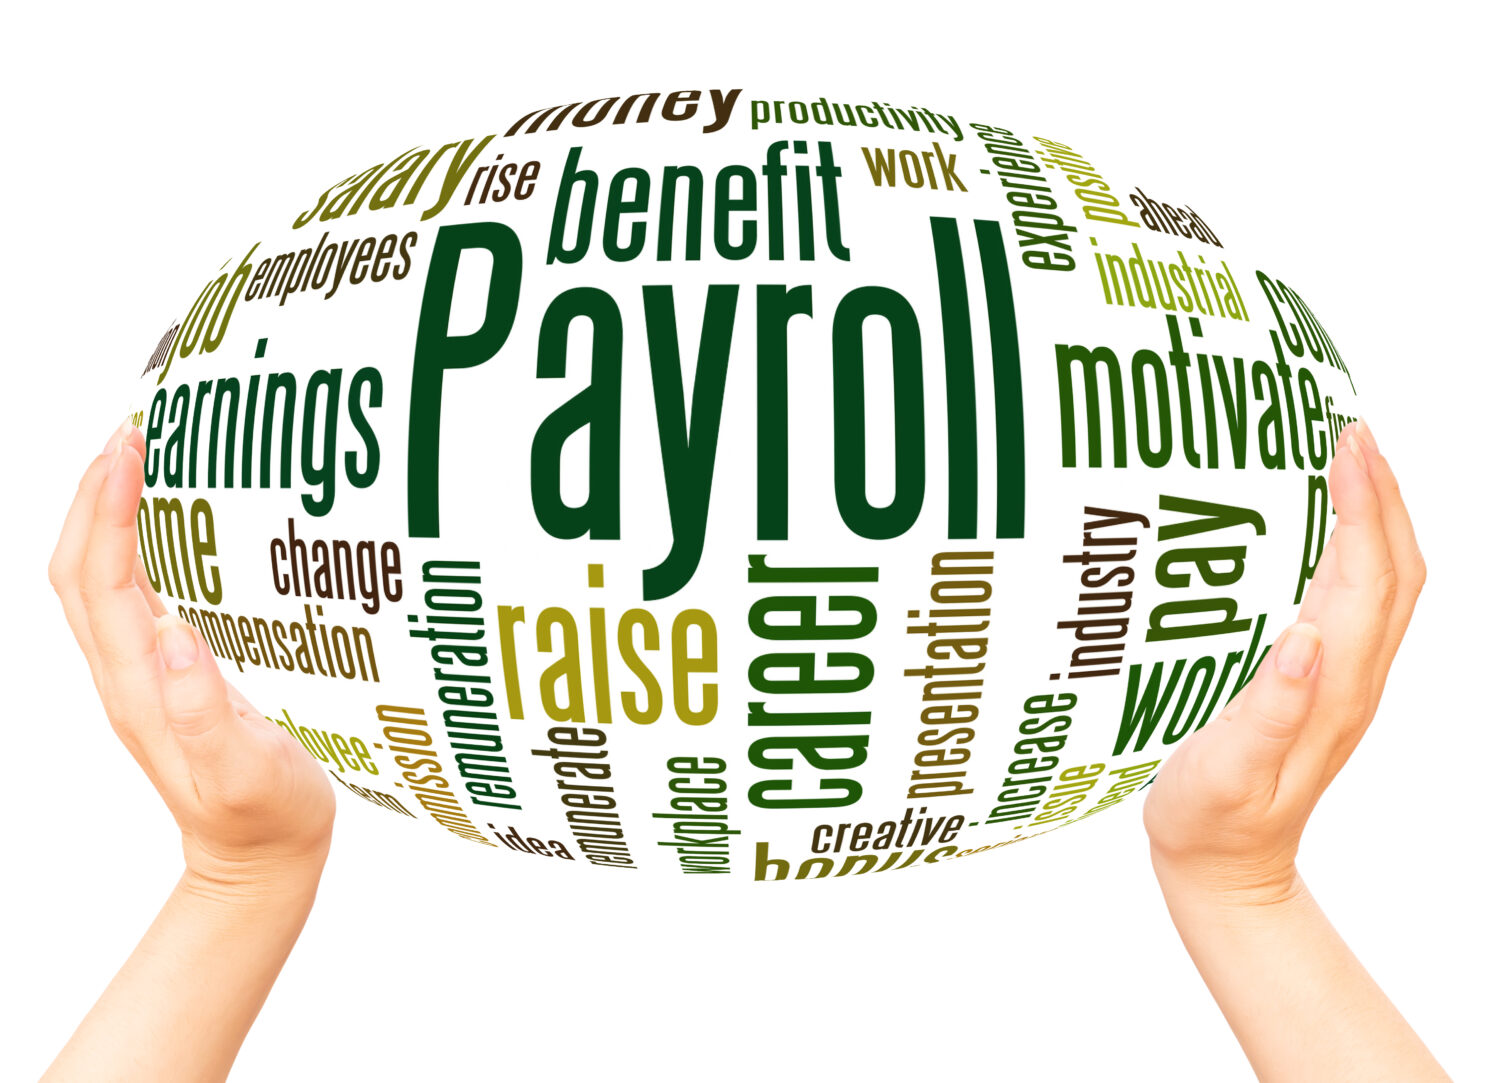 Payroll word cloud hand sphere concept on white background.